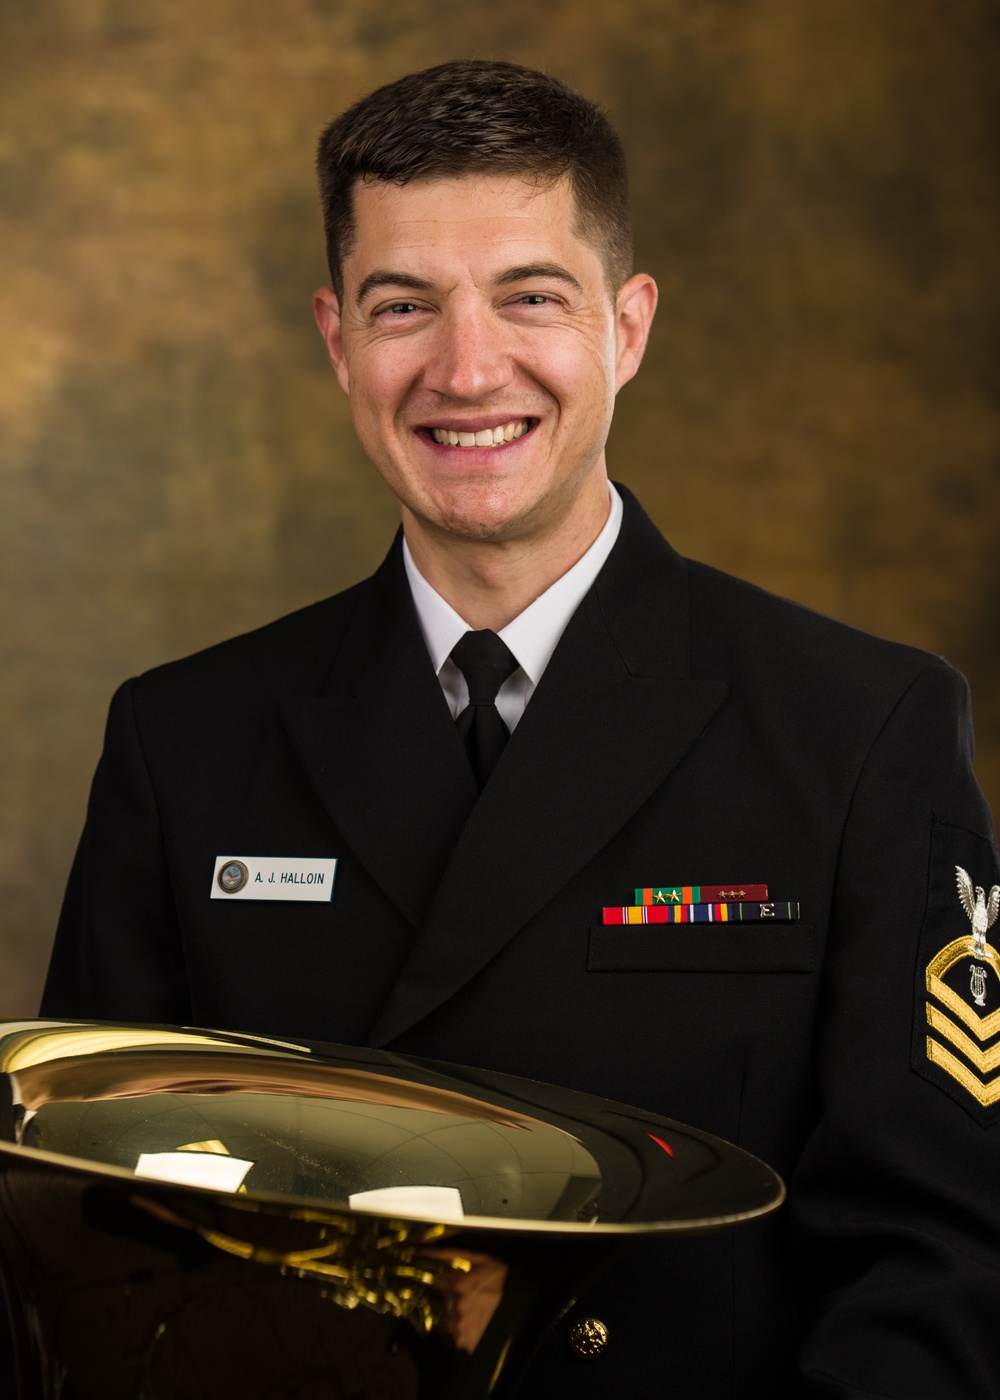 Navy Senior Petty Officer Halloin, supports the 58th Presidential Inauguration